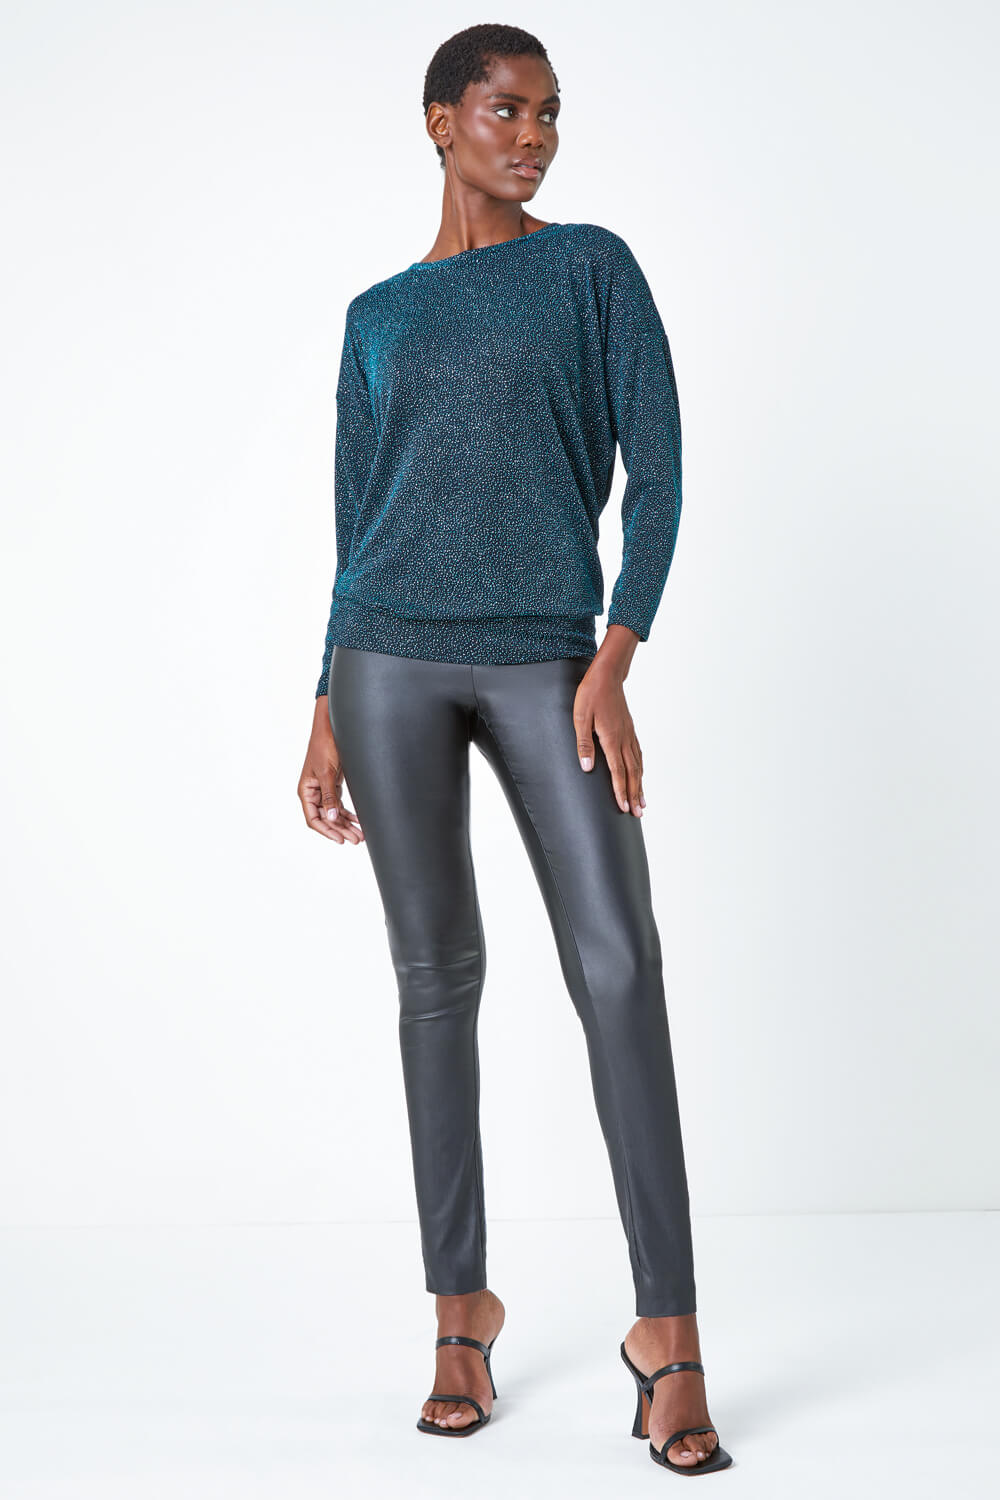 Teal Glitter Blouson Stretch Top , Image 2 of 5